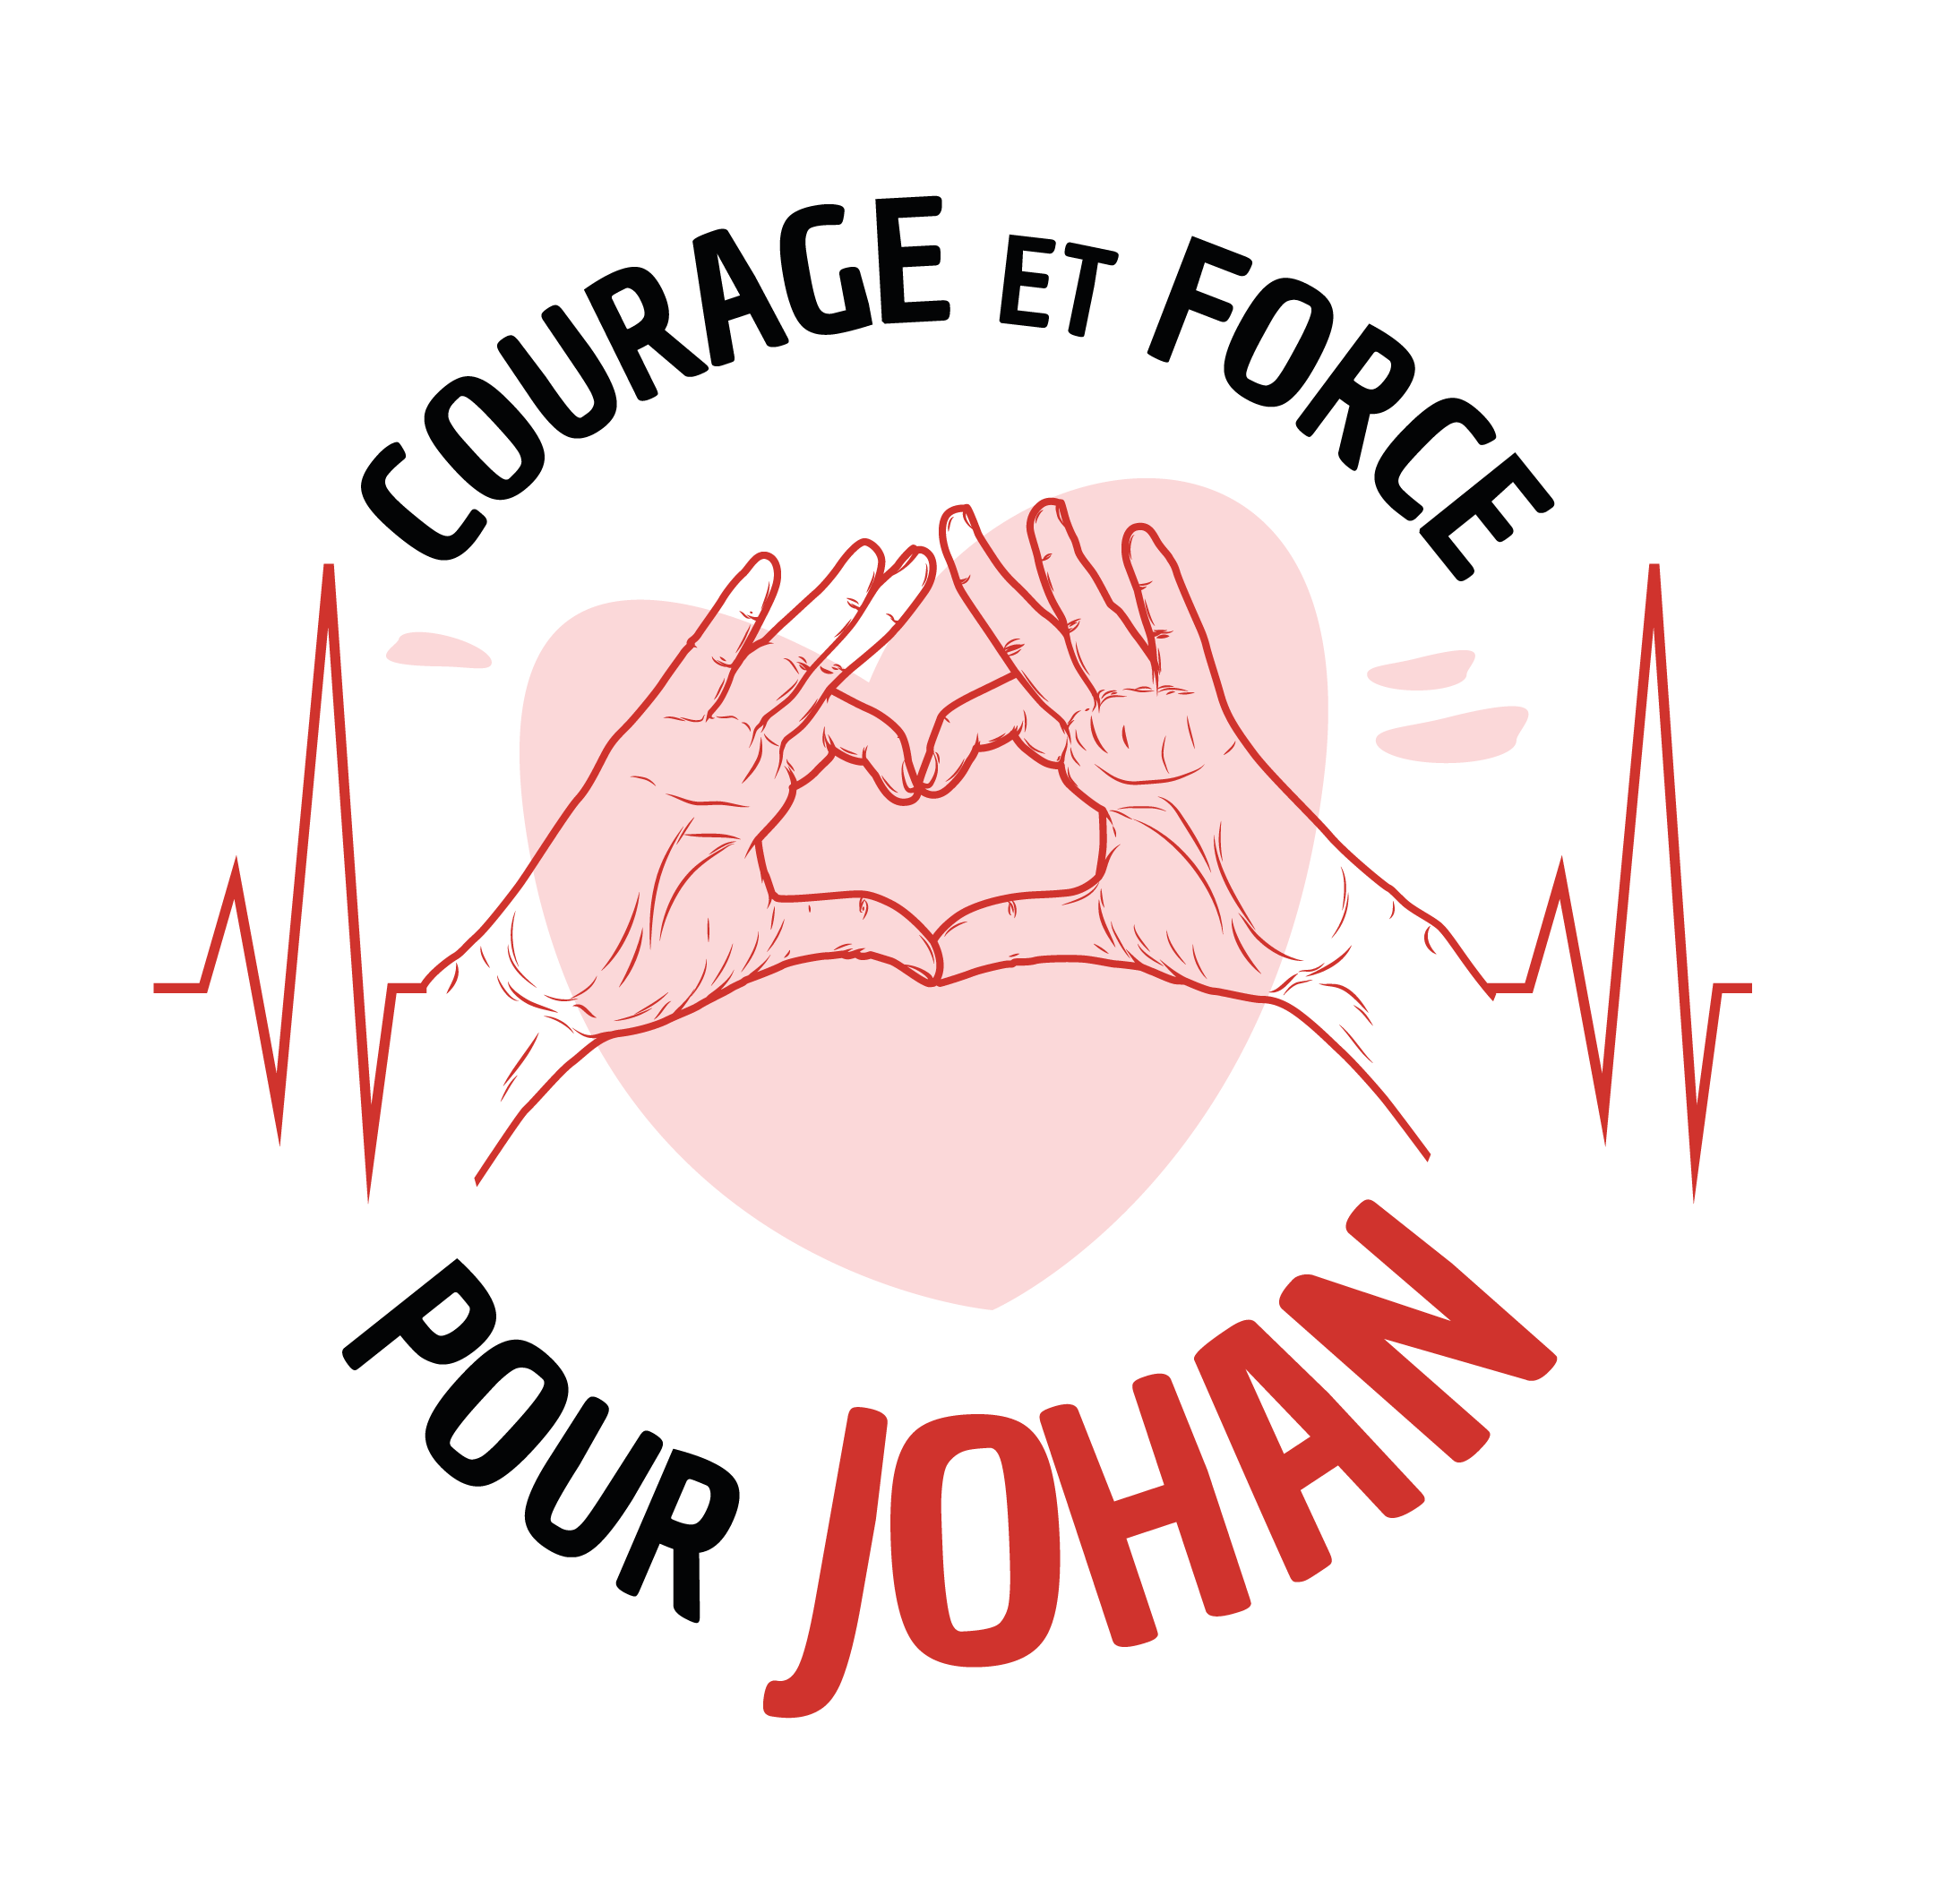 Courage & Force pour Johan !